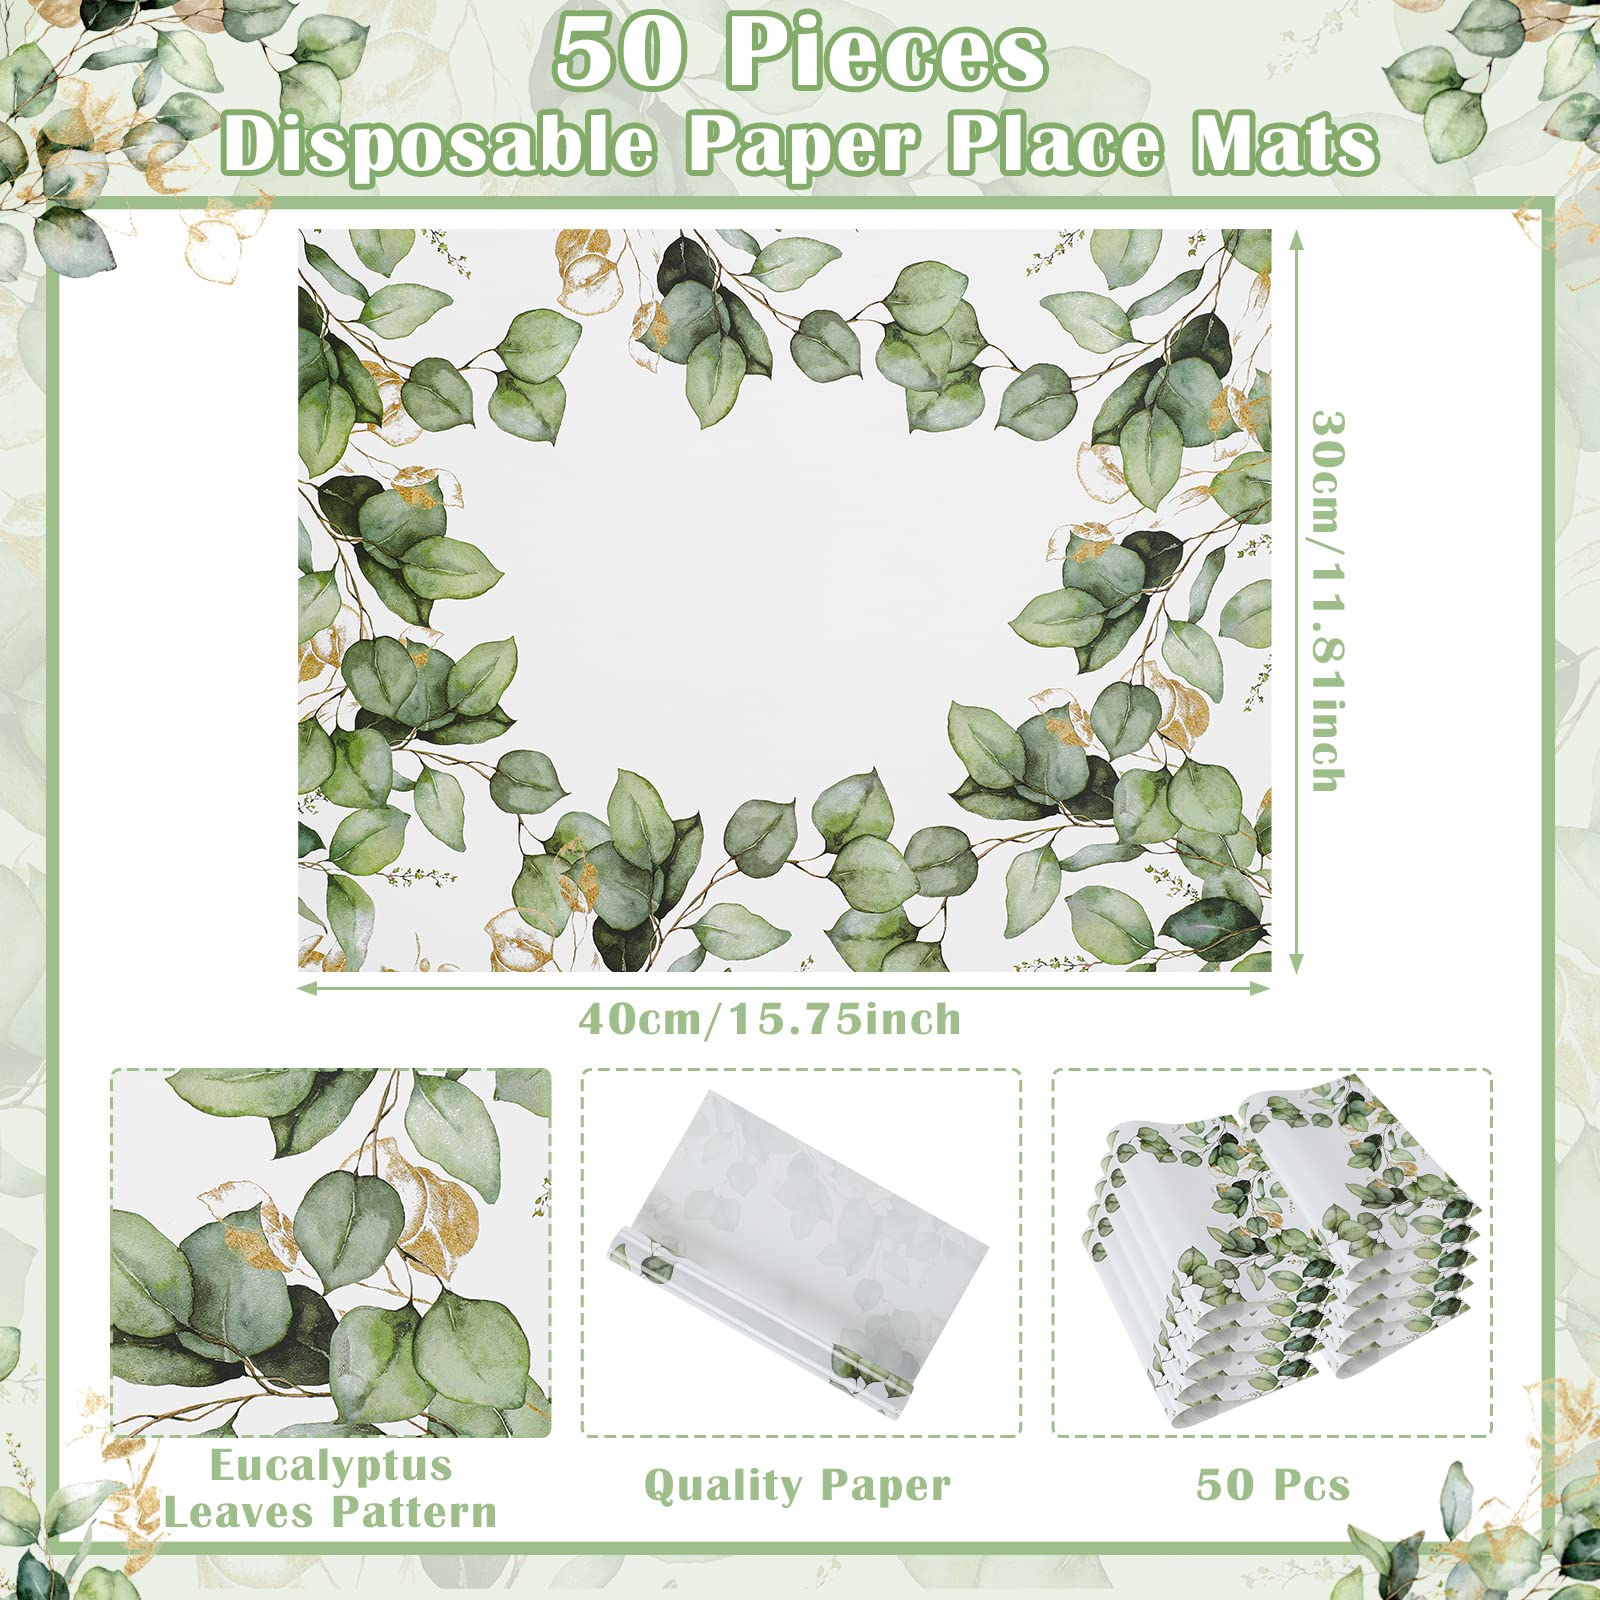 Sumind Eucalyptus Leaves Place Mat 12 x 16 in Sage Green Disposable Paper Table Mat for Christmas Wedding Party Dining Rustic Farmhouse Dinnerware for Kitchen Table Baby Shower Birthday(50 Pcs)